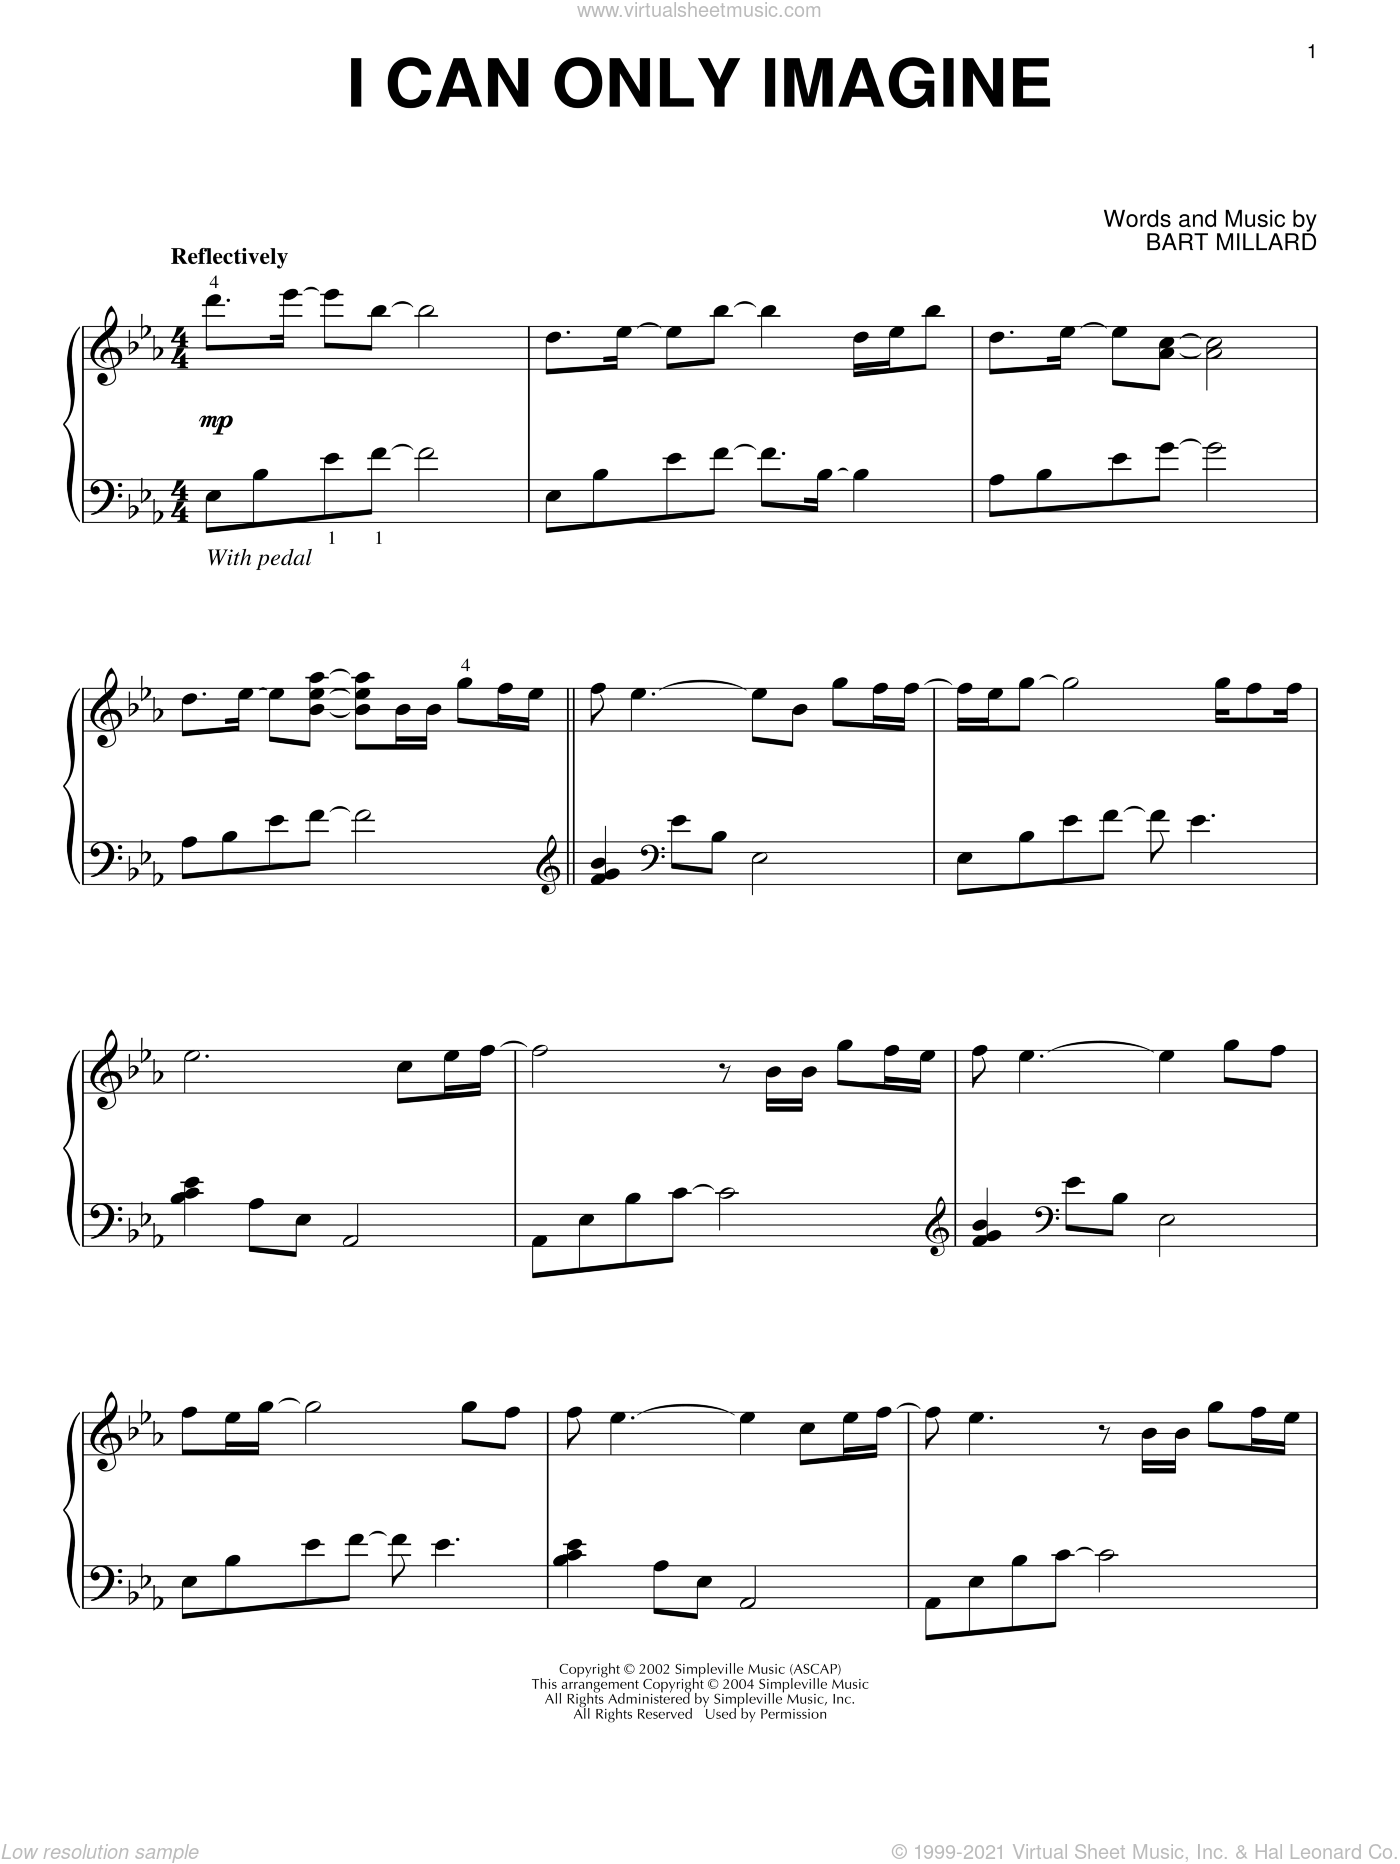 MercyMe - I Can Only Imagine sheet music for piano solo [PDF]